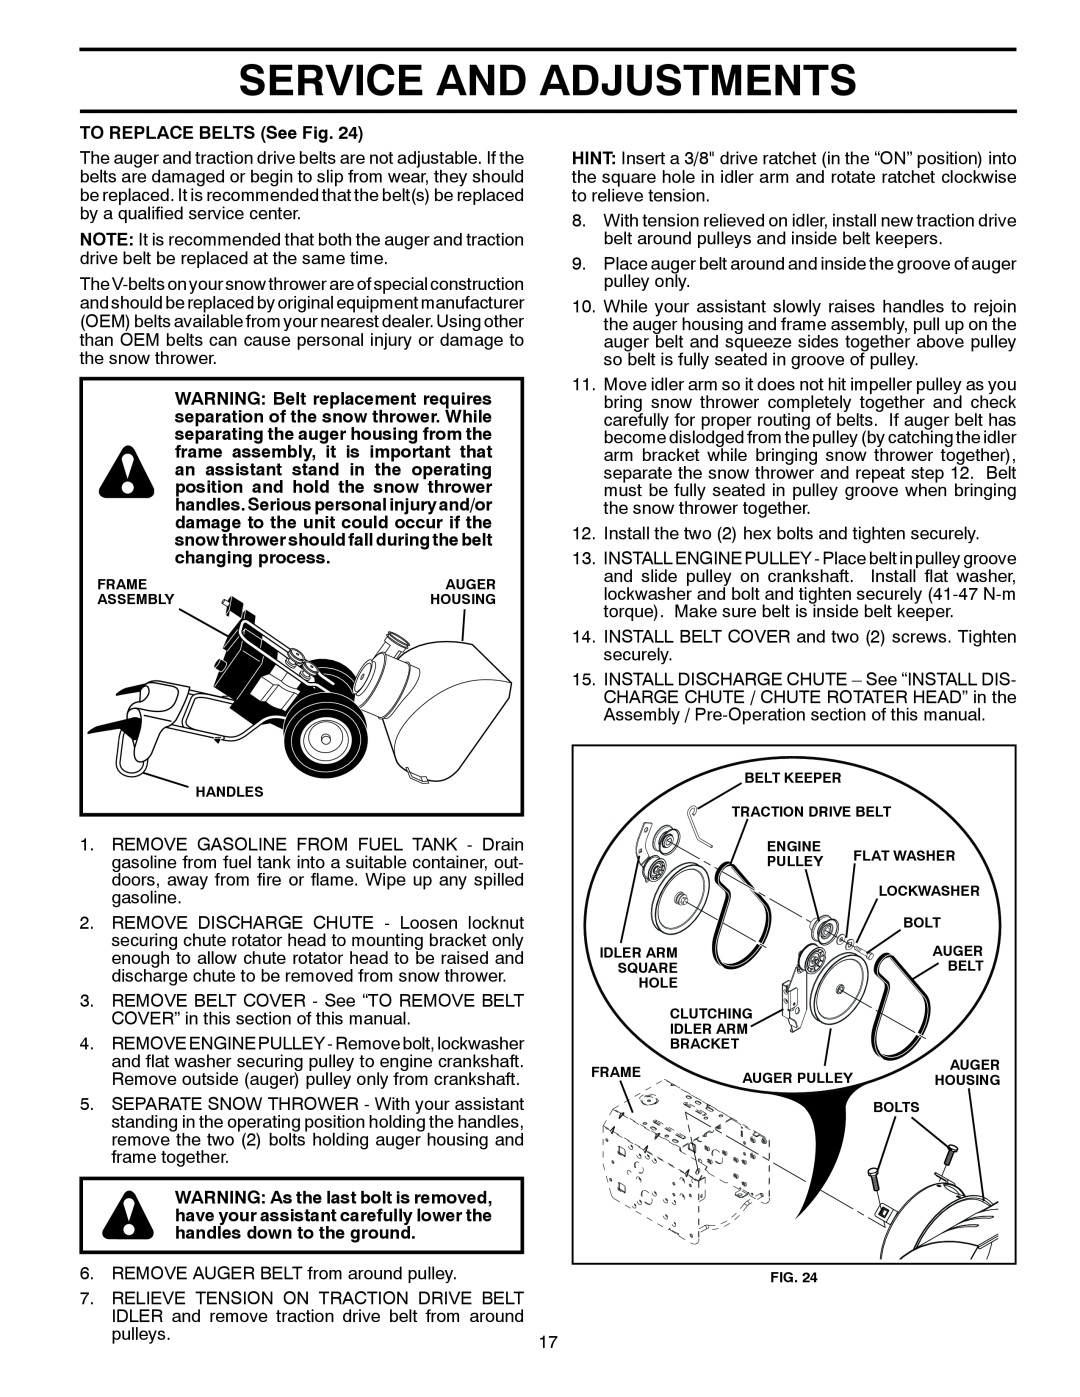 Husqvarna 924SB-XLS owner manual Service And Adjustments, TO REPLACE BELTS See Fig 